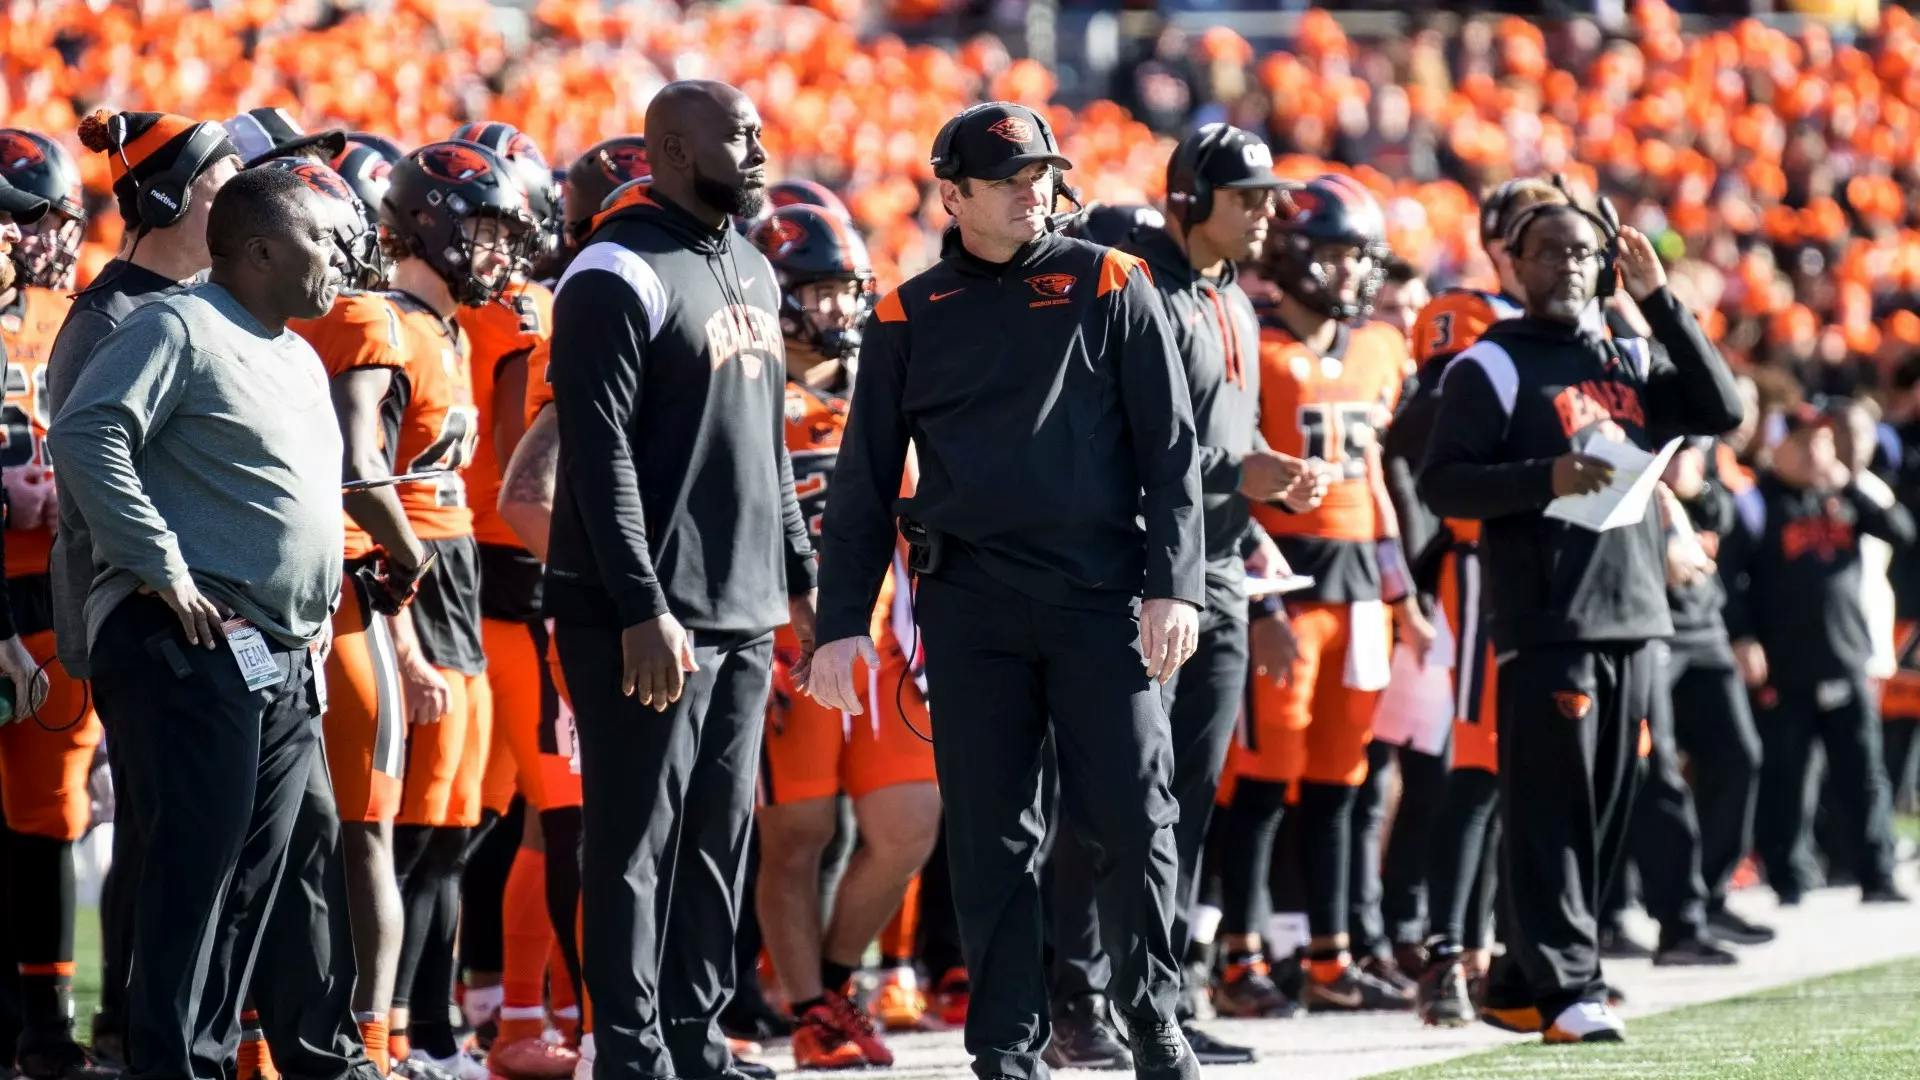 Former Beavers football coach Jonathan Smith on the sidelines. Photo from Oregon State University Athletics.